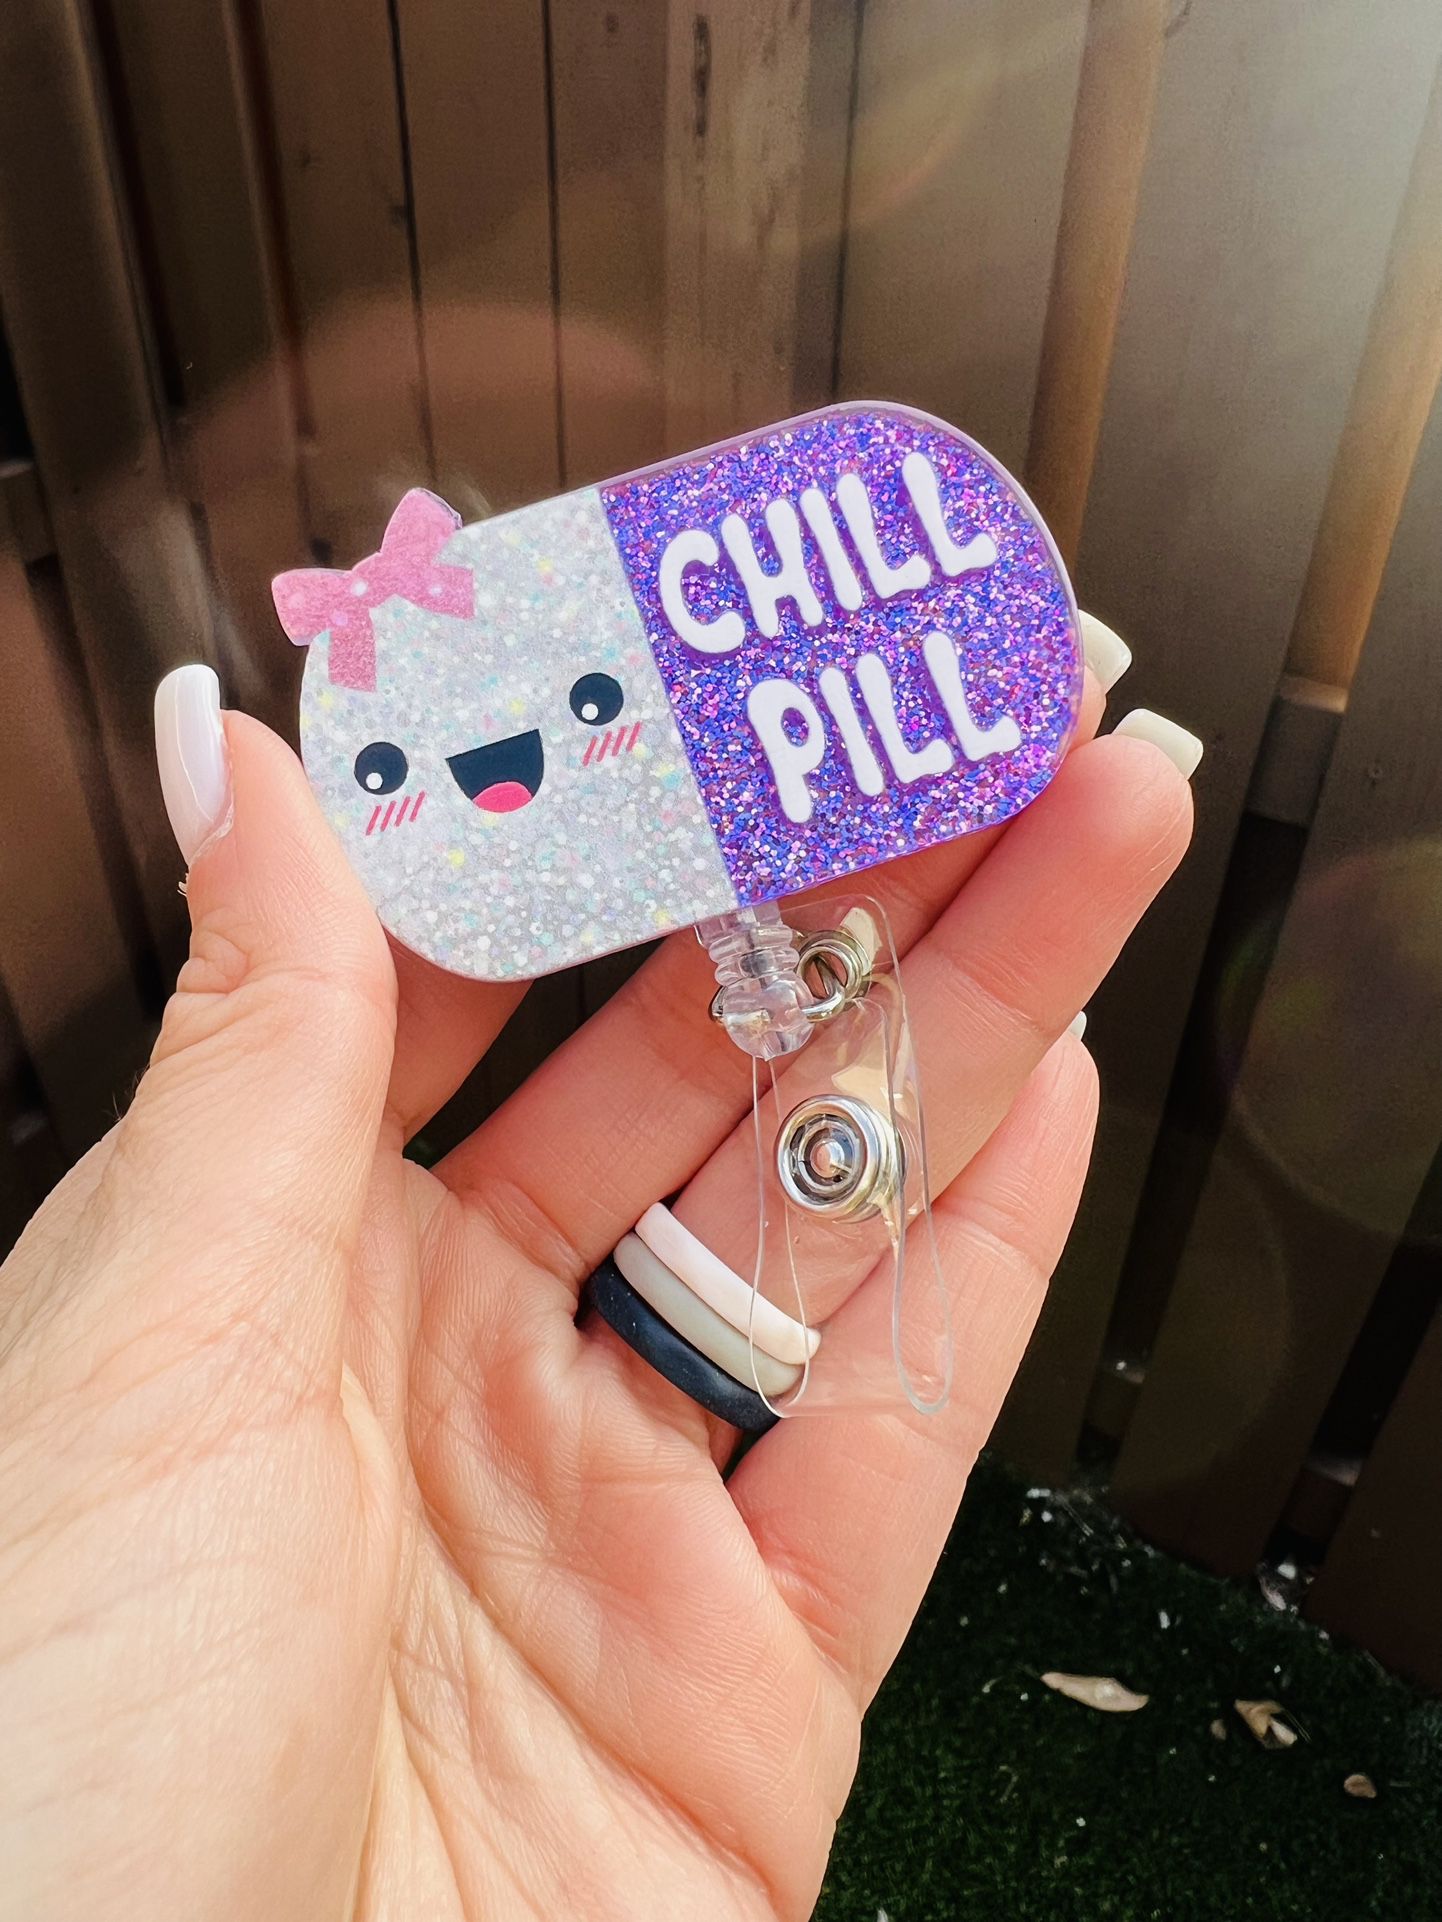 Nursing Medical Assistant Chill Pill Badge Reel ID Holder for Sale in  Hialeah, FL - OfferUp